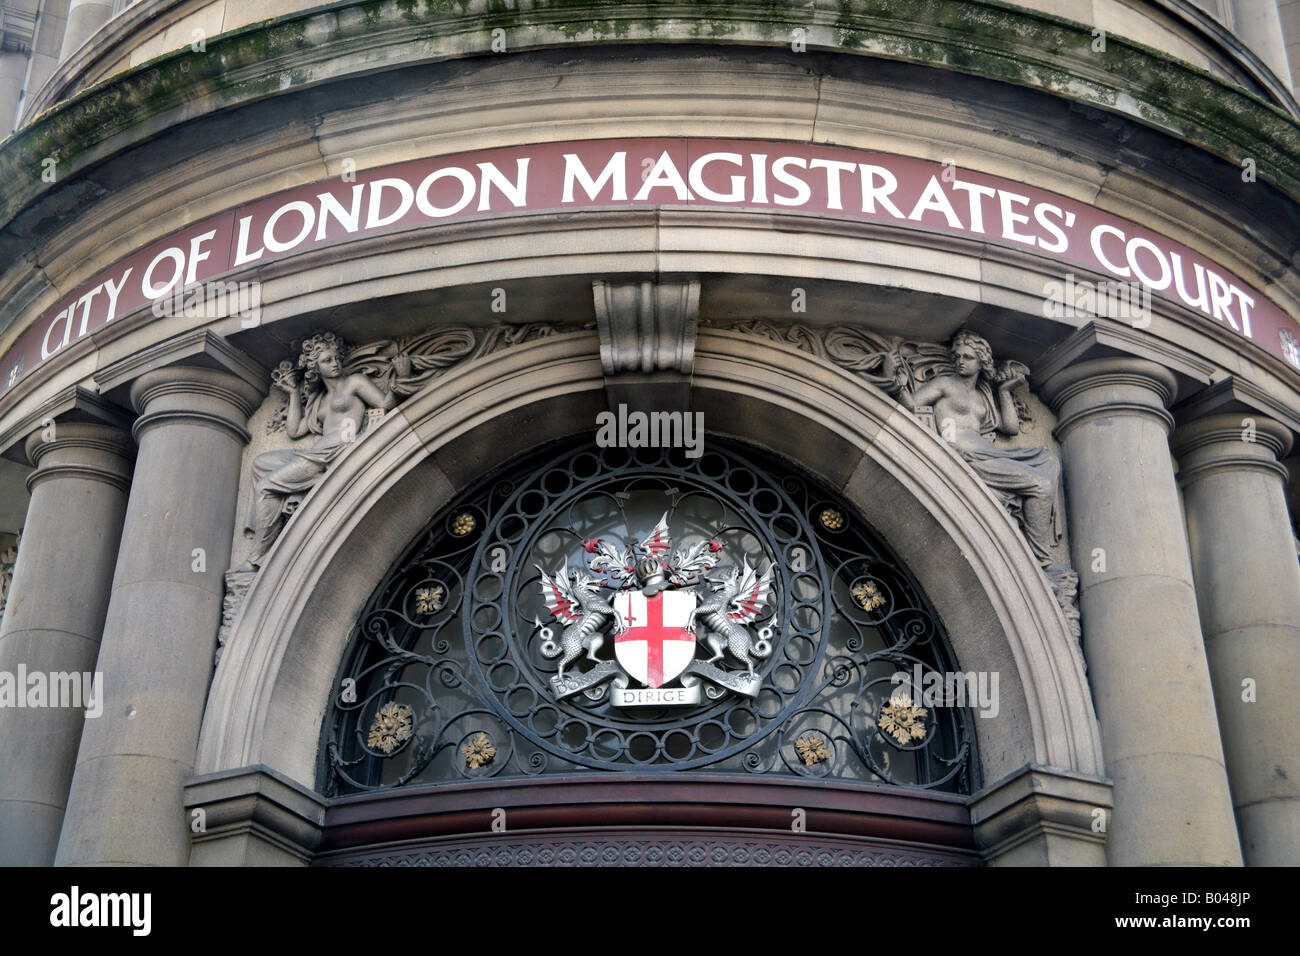 Entrance to City of London Magistrates Court Stock Photo